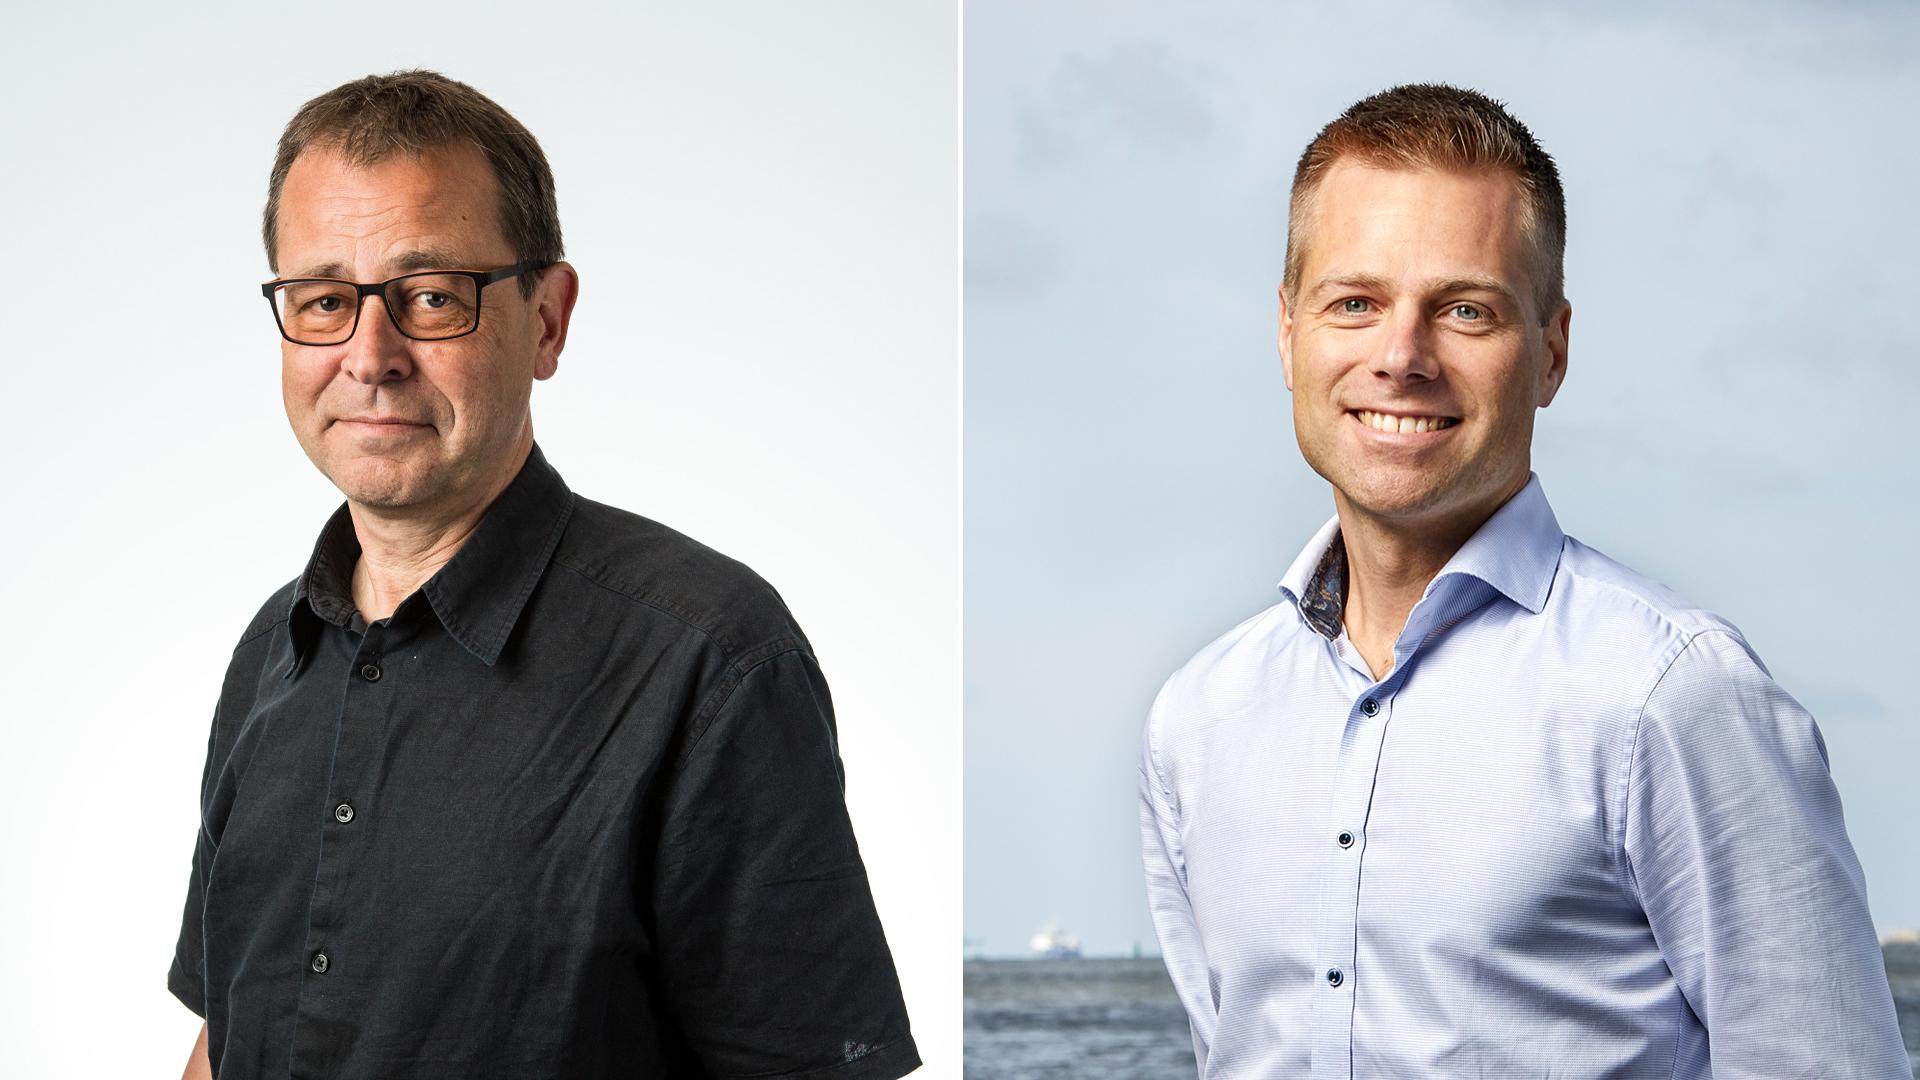 Erik Fridell (left), who works with maritime issues at IVL and Martin Carlweitz (right), who works with operations in Liner Service at WALLENIUS SOL.